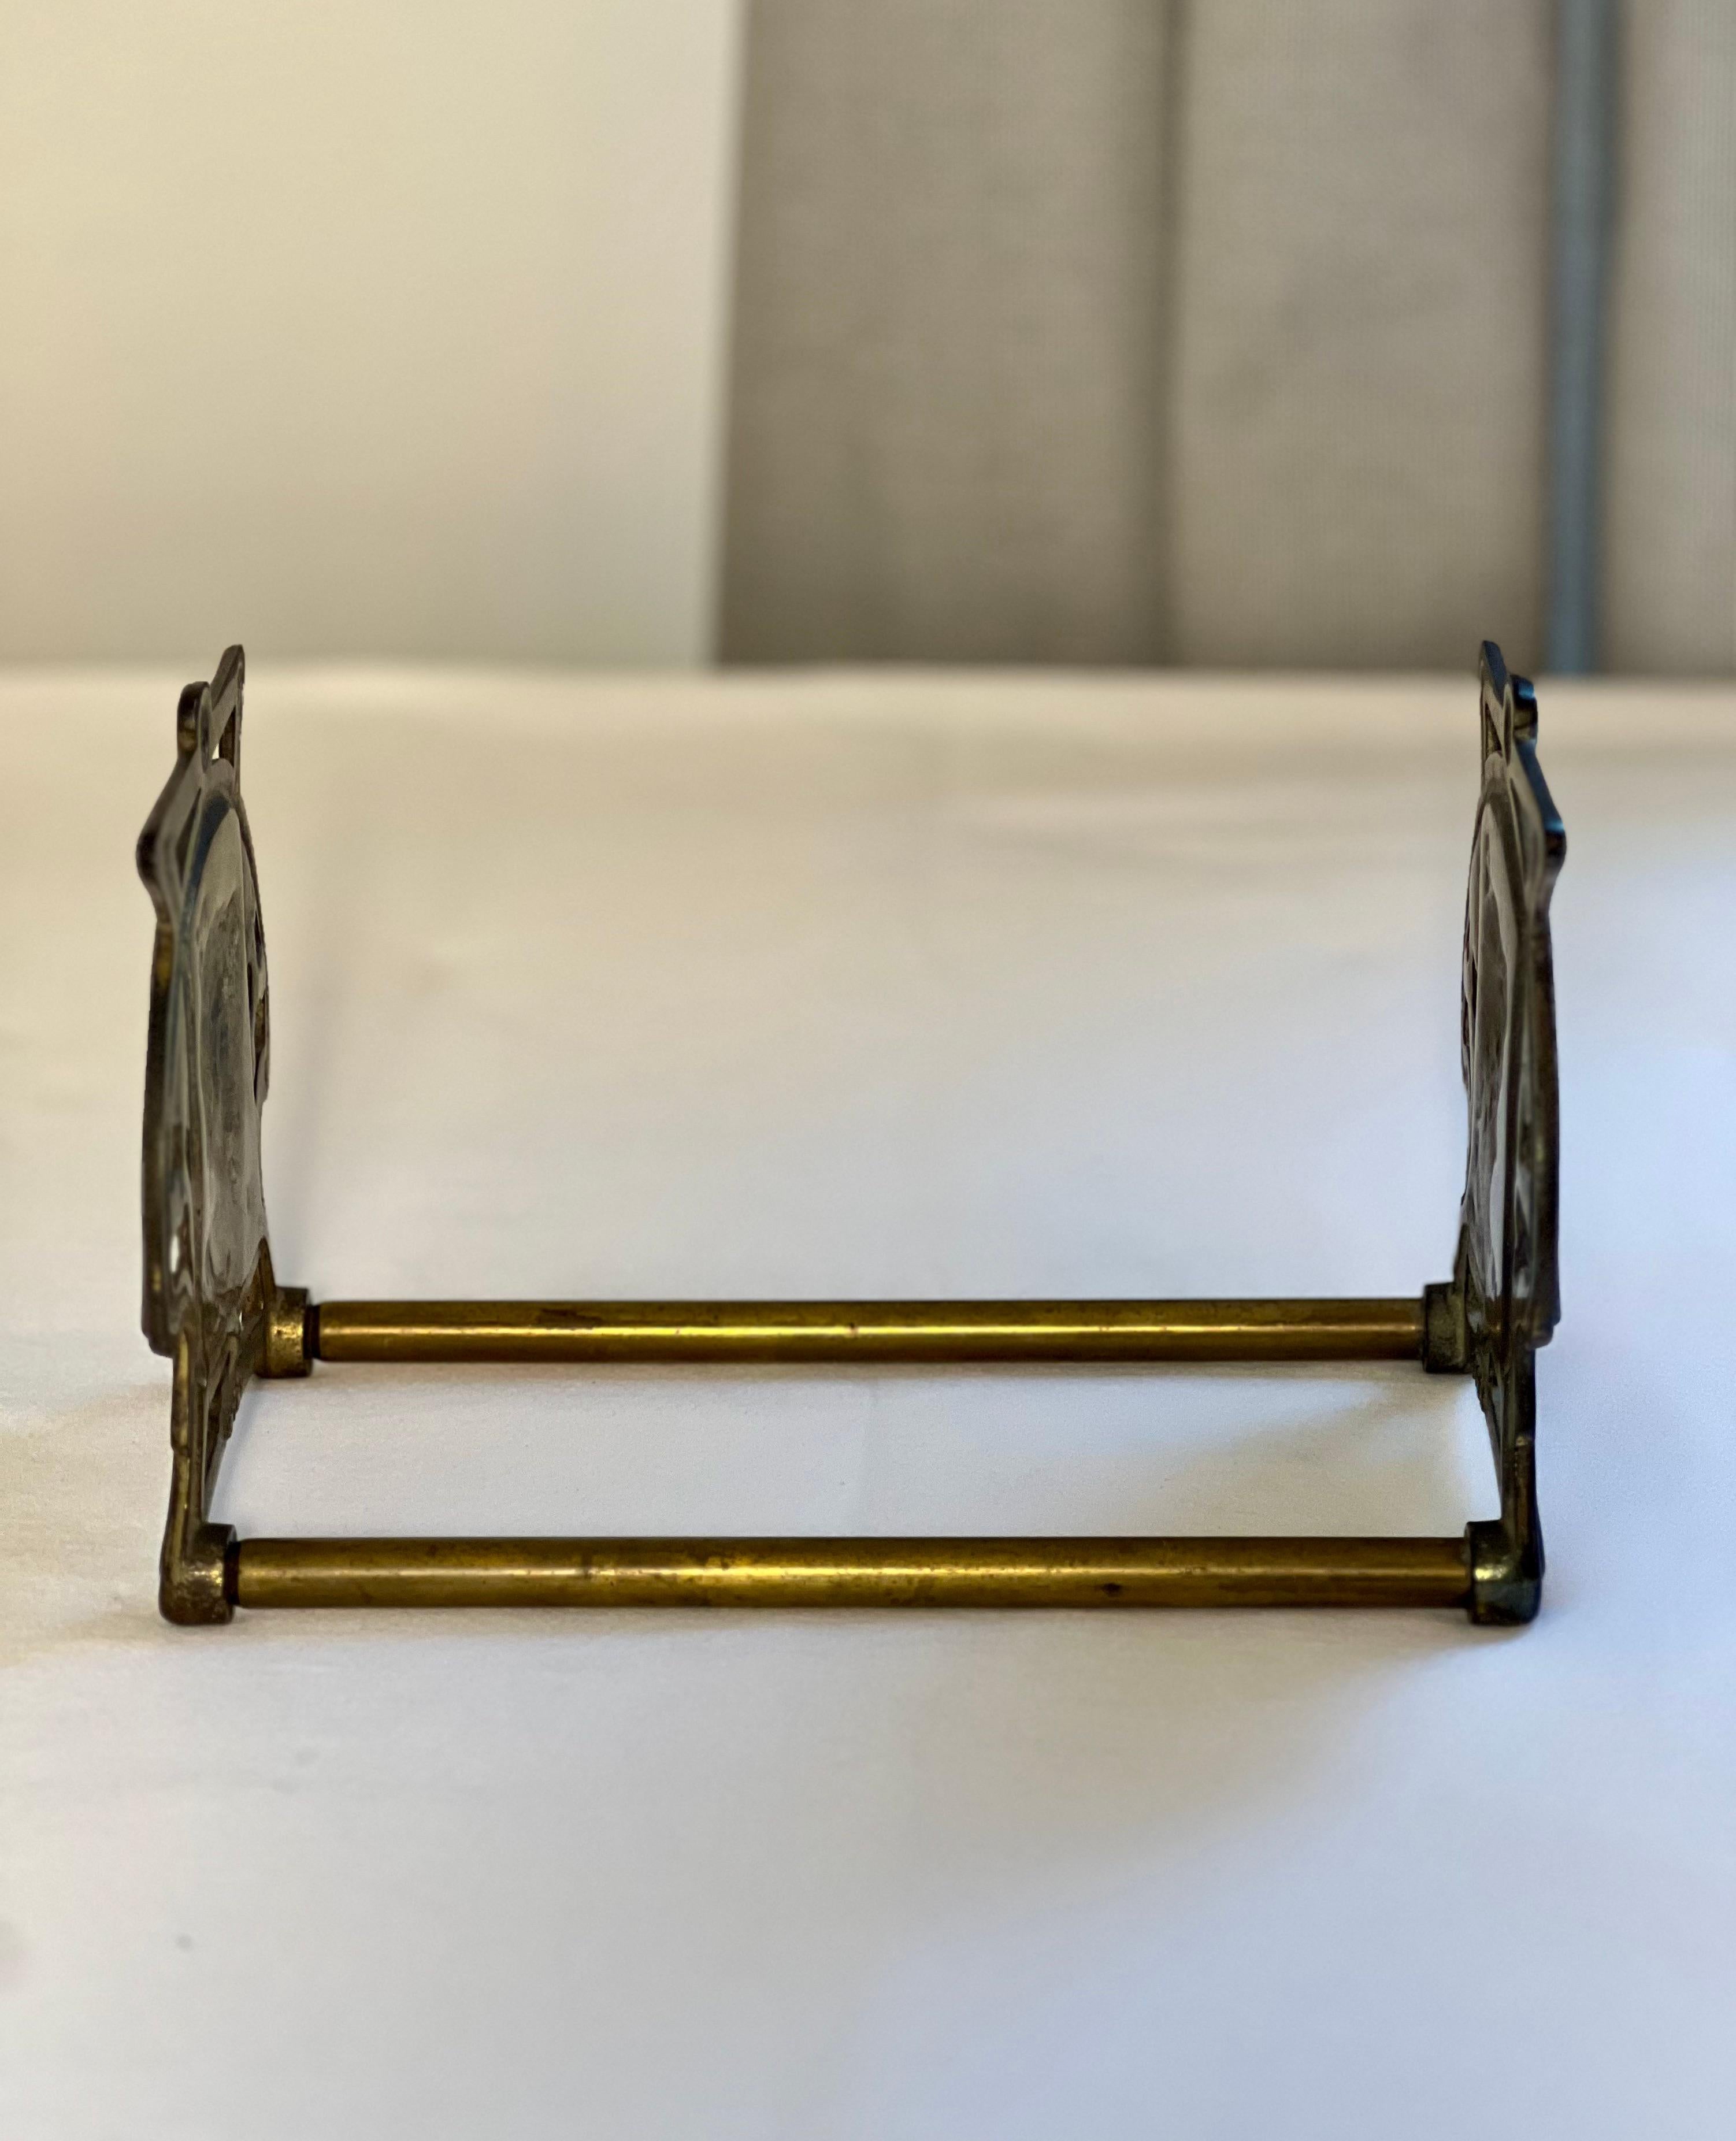 Antique Art Nouveau Cast Iron and Brass Adjustable Book Stand by Judd Company In Good Condition For Sale In Doylestown, PA